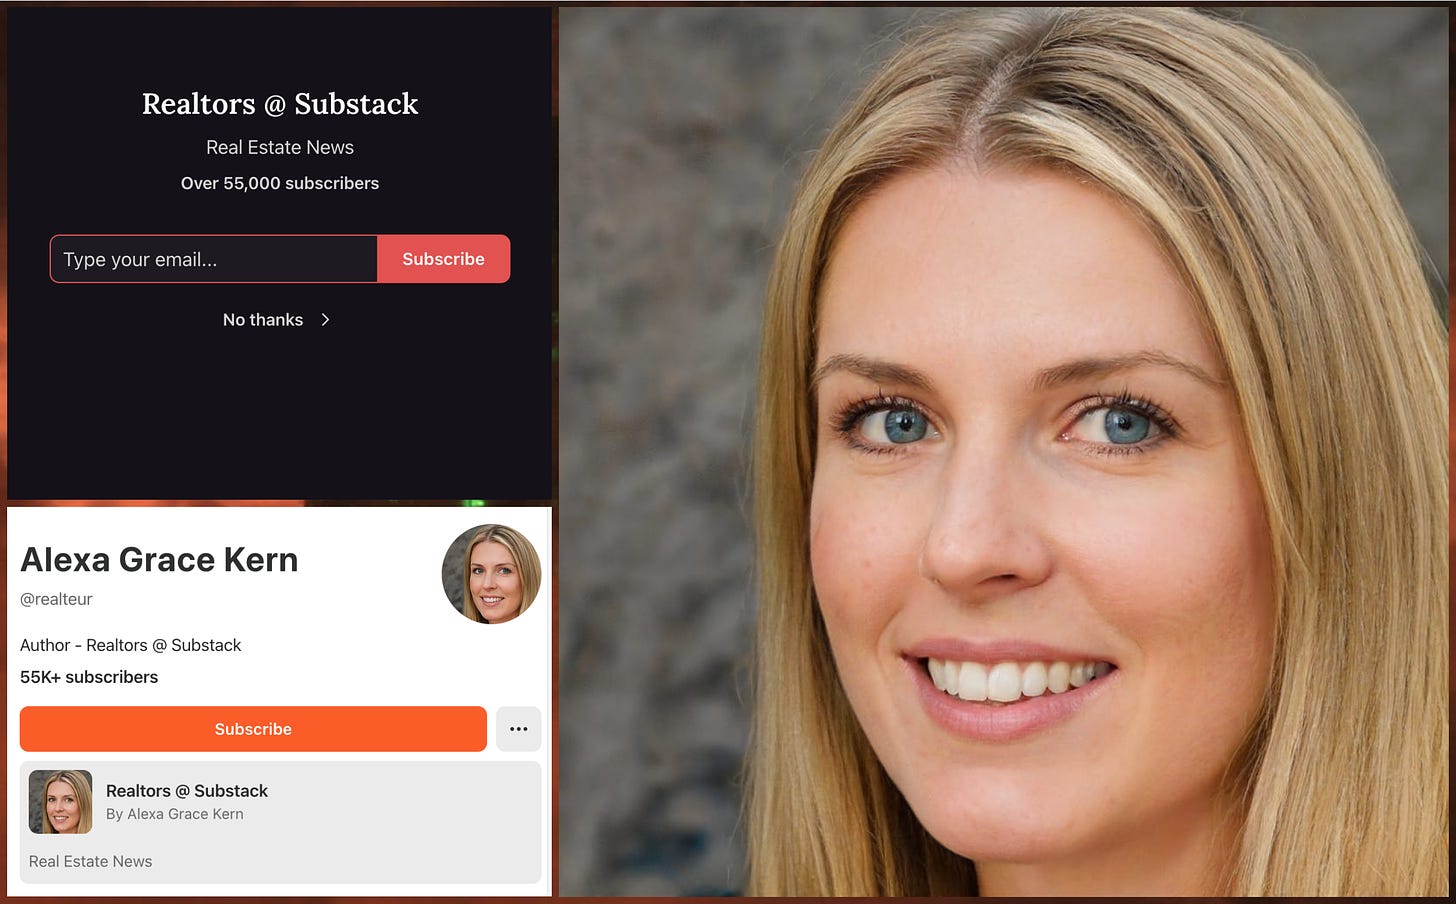 screenshots of the "Realtors @ Substack" blog and its alleged author "Alexa Grace Kern", whose profile image is a GAN-generated face